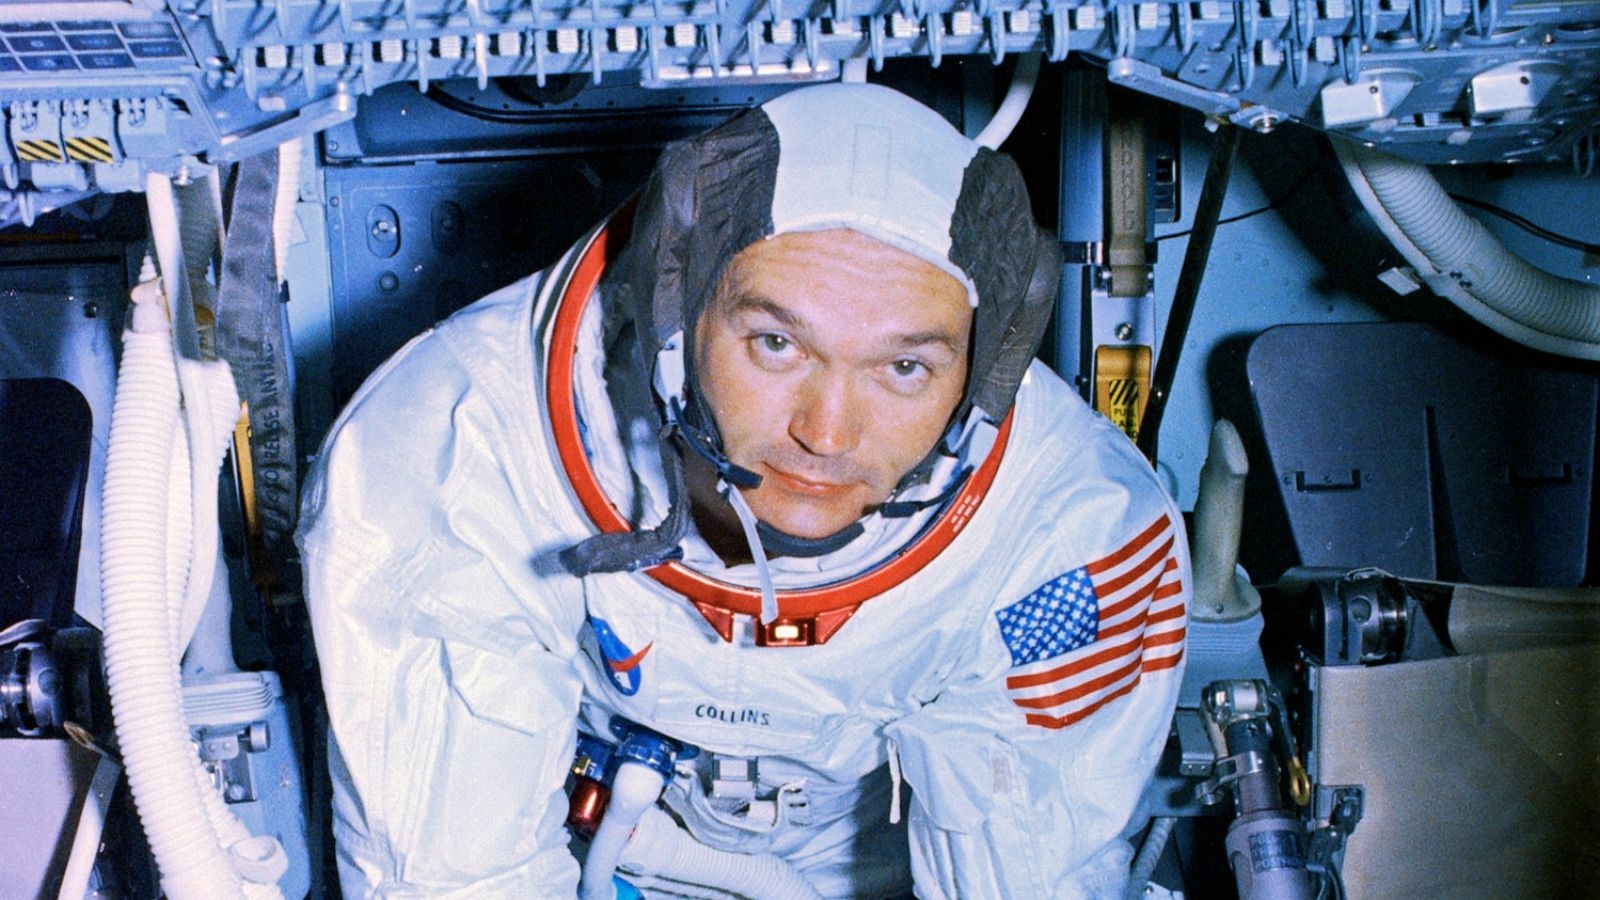 Who is Michael Collins: Biography, Astronauts Career and Legacy